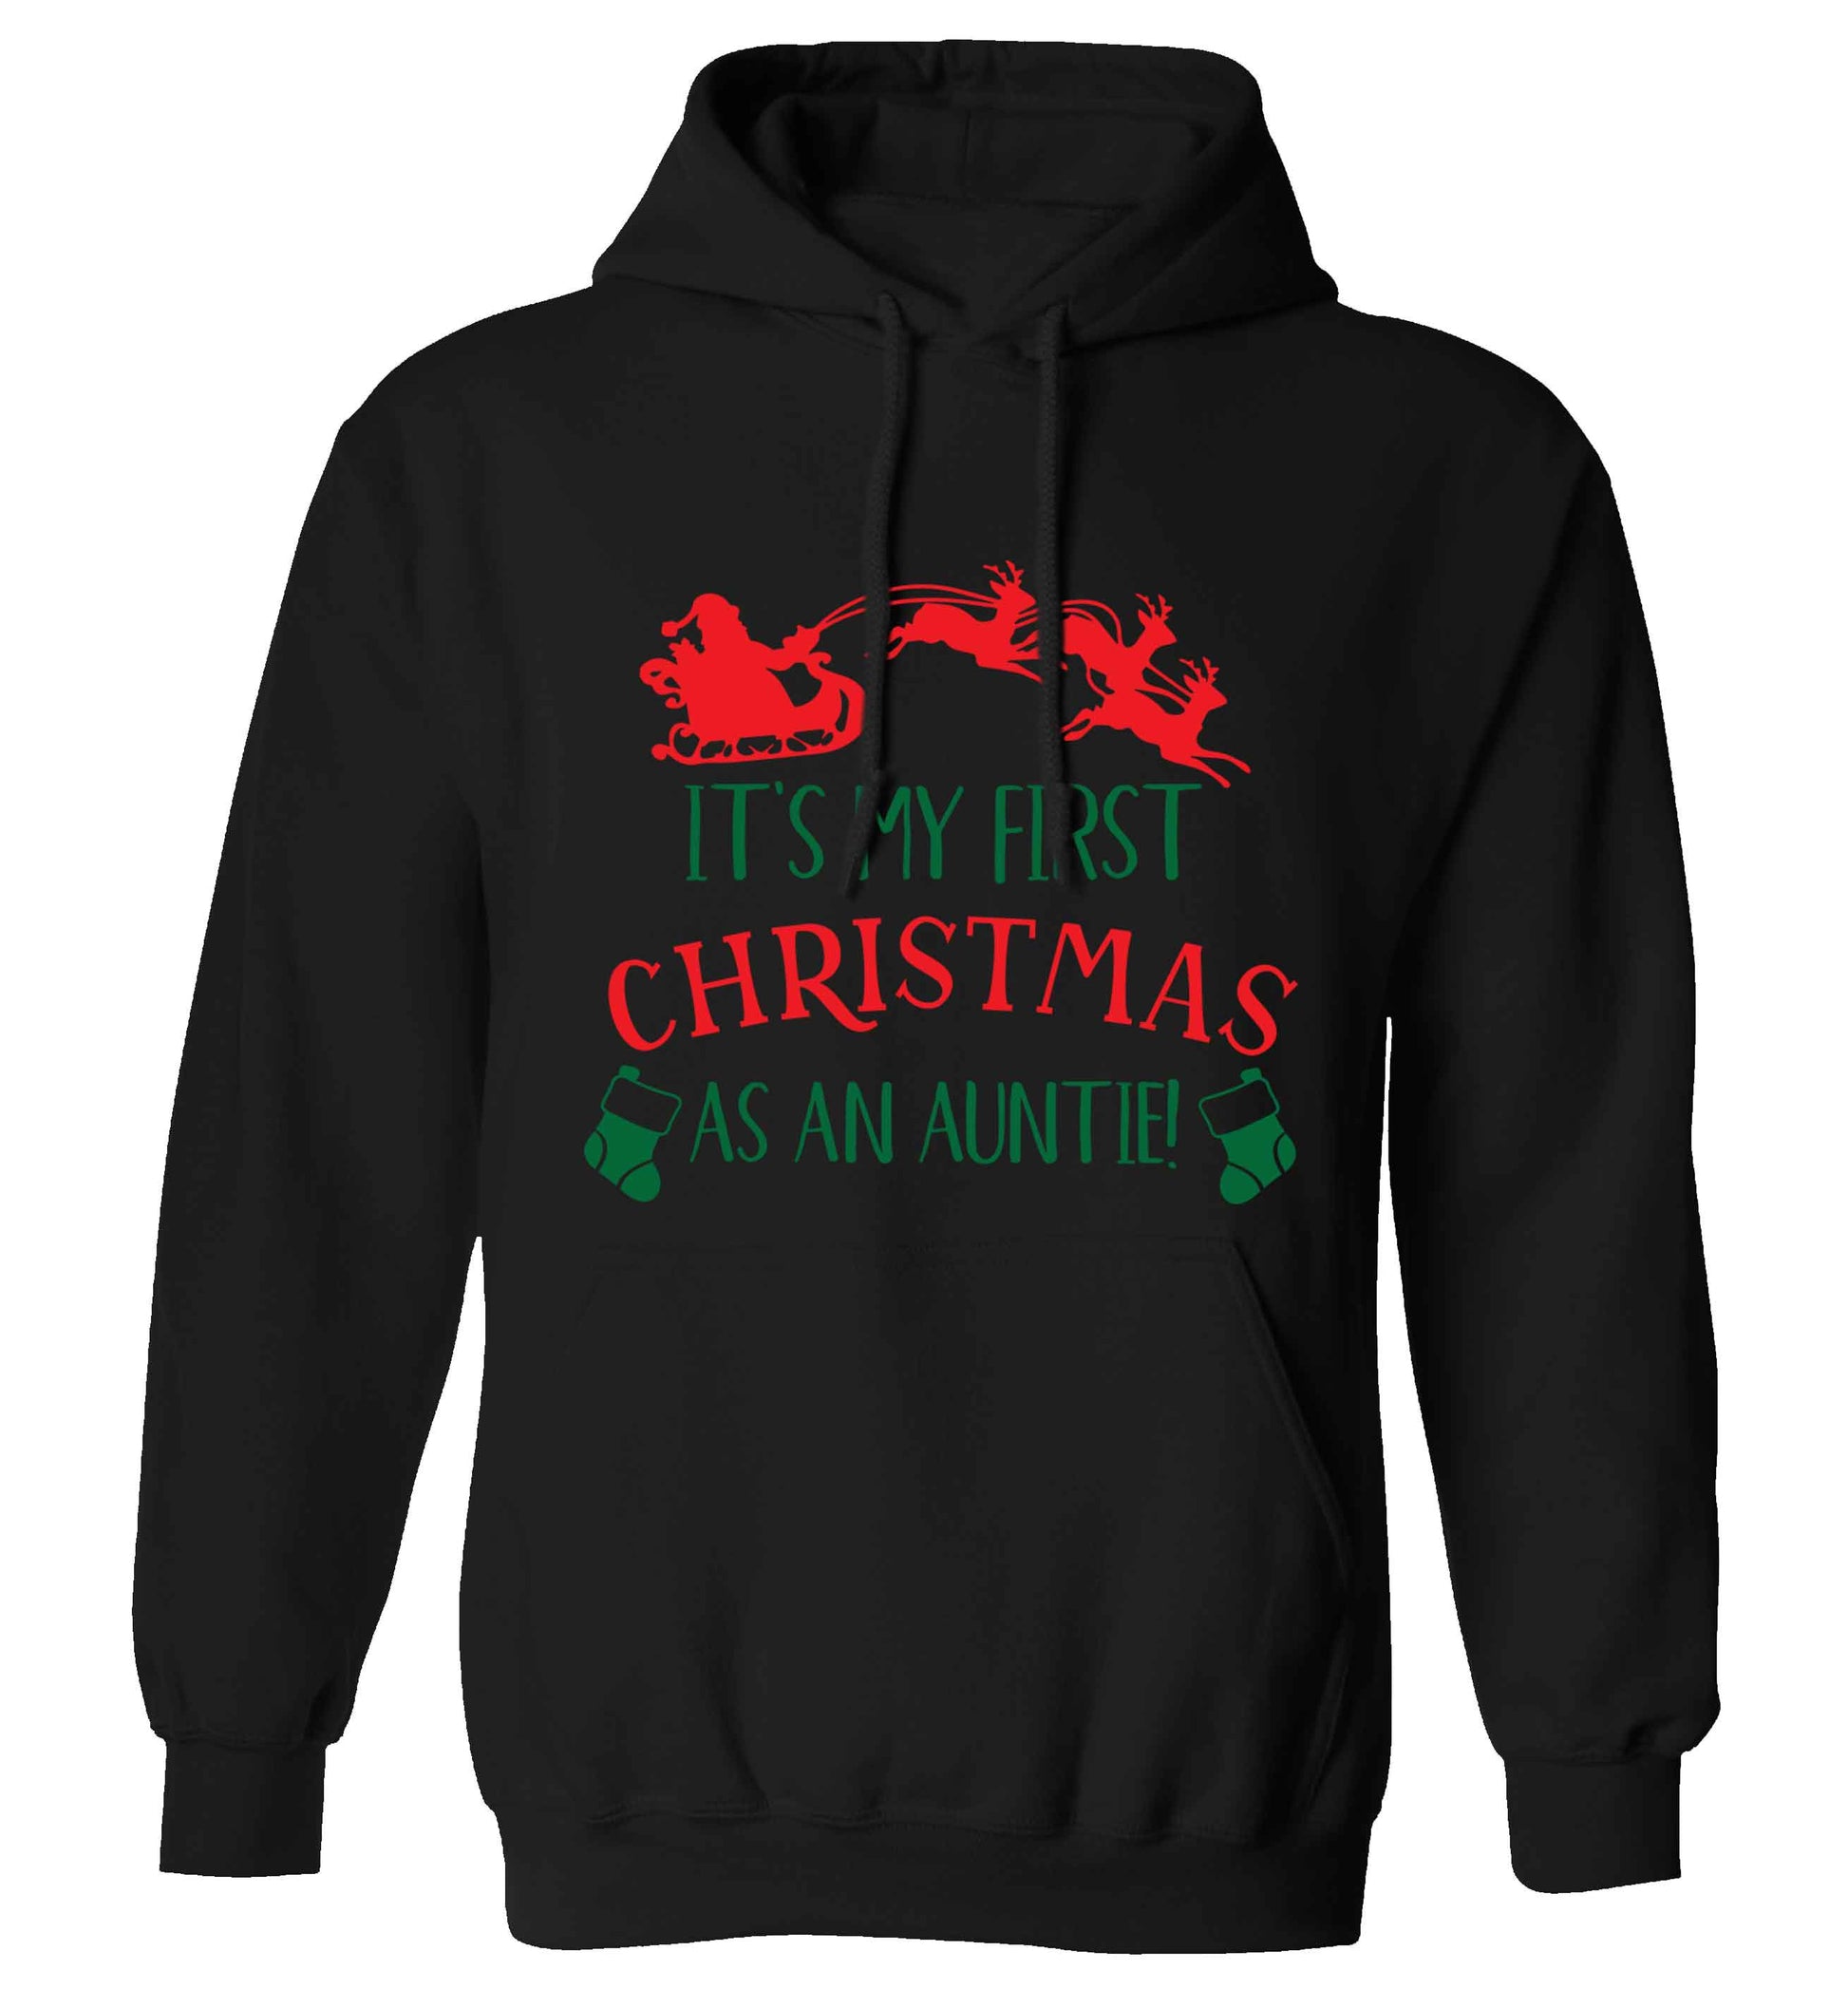 It's my first Christmas as an auntie! adults unisex black hoodie 2XL